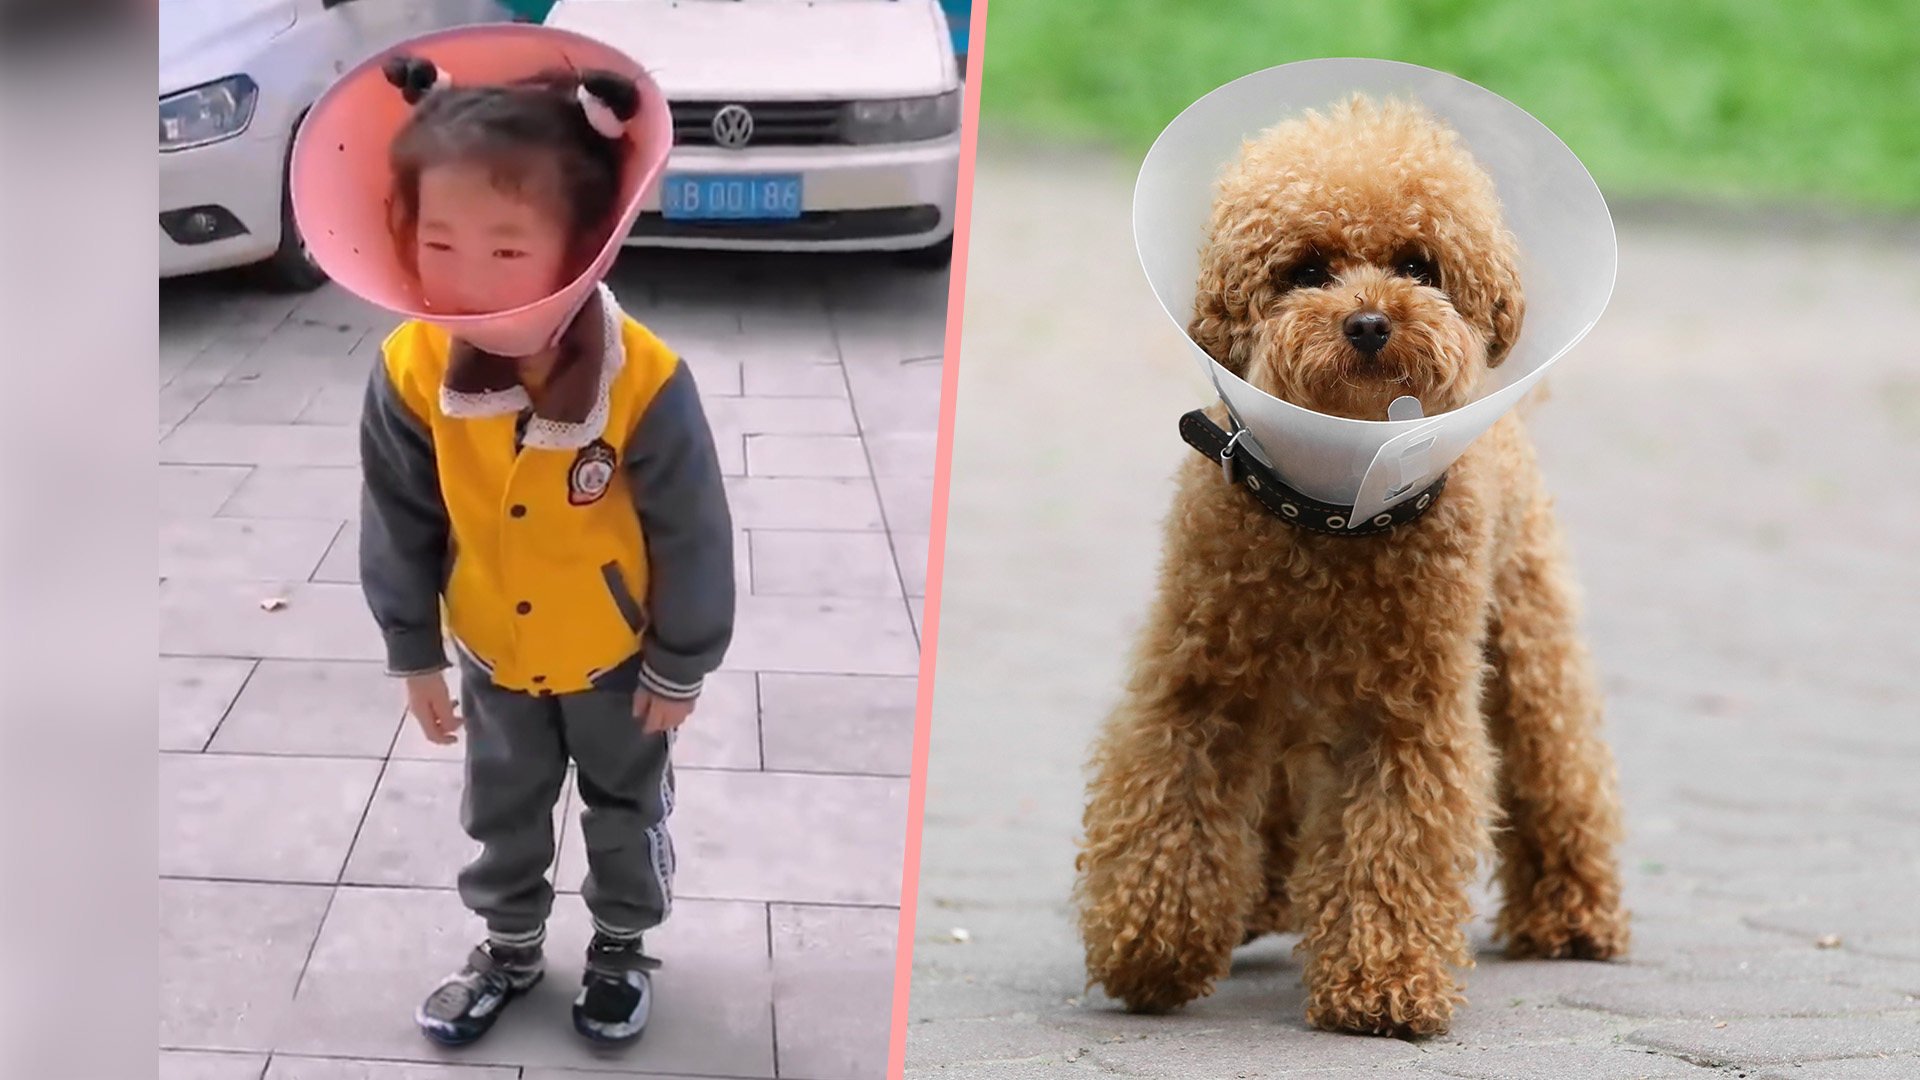 A young girl showed hesitation when she was compelled to wear a dog cone collar, which was intended to prevent her from excessively using her mobile device. Photo: SCMP composite/Shutterstock/Weibo